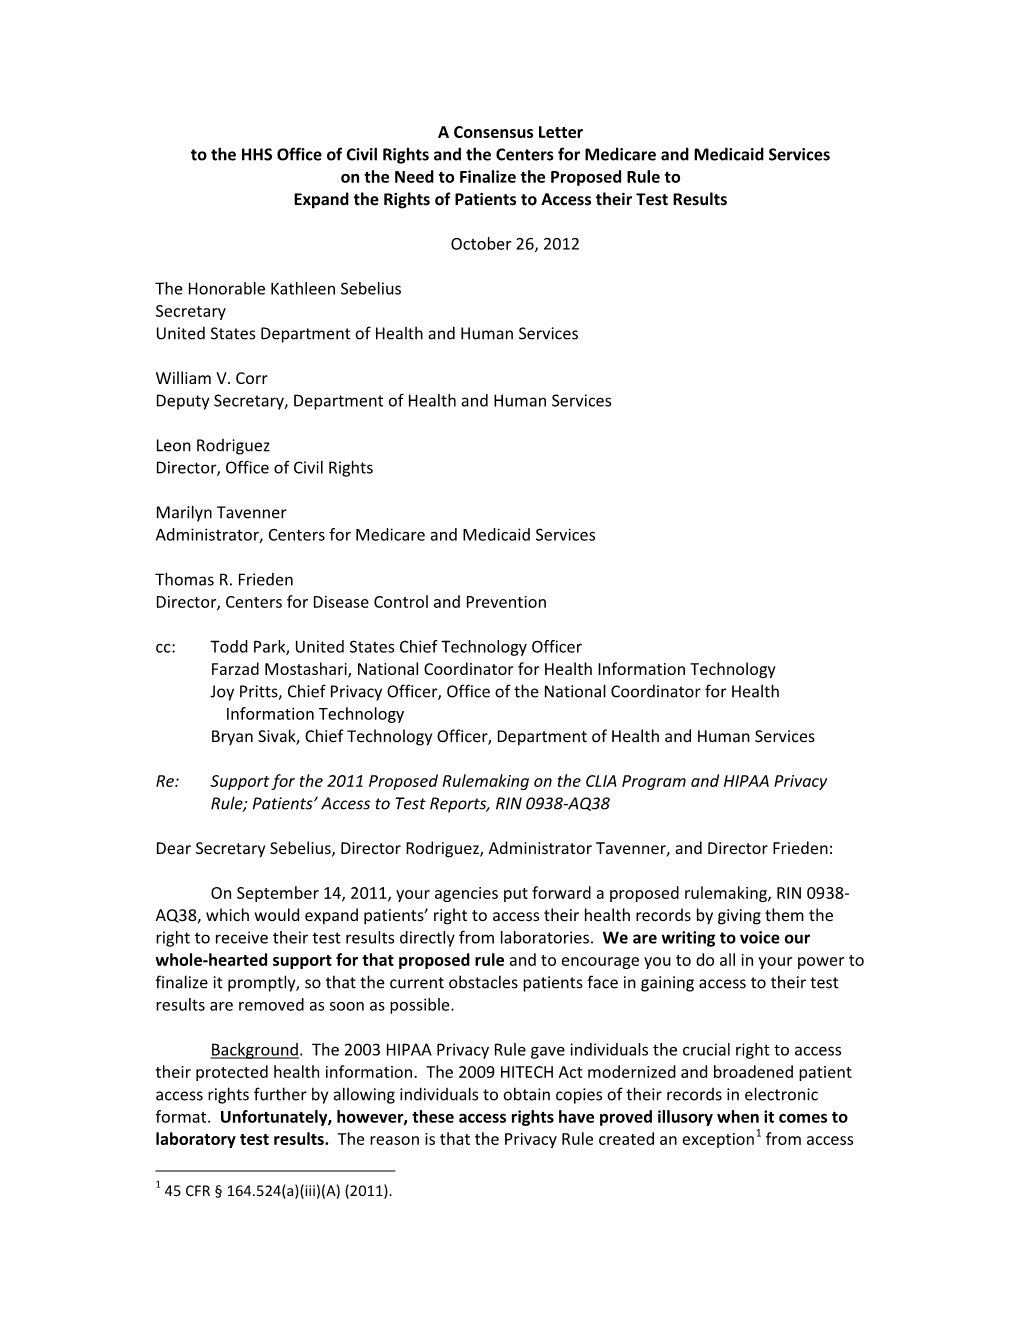 A Consensus Letter to the HHS Office of Civil Rights and the Centers For